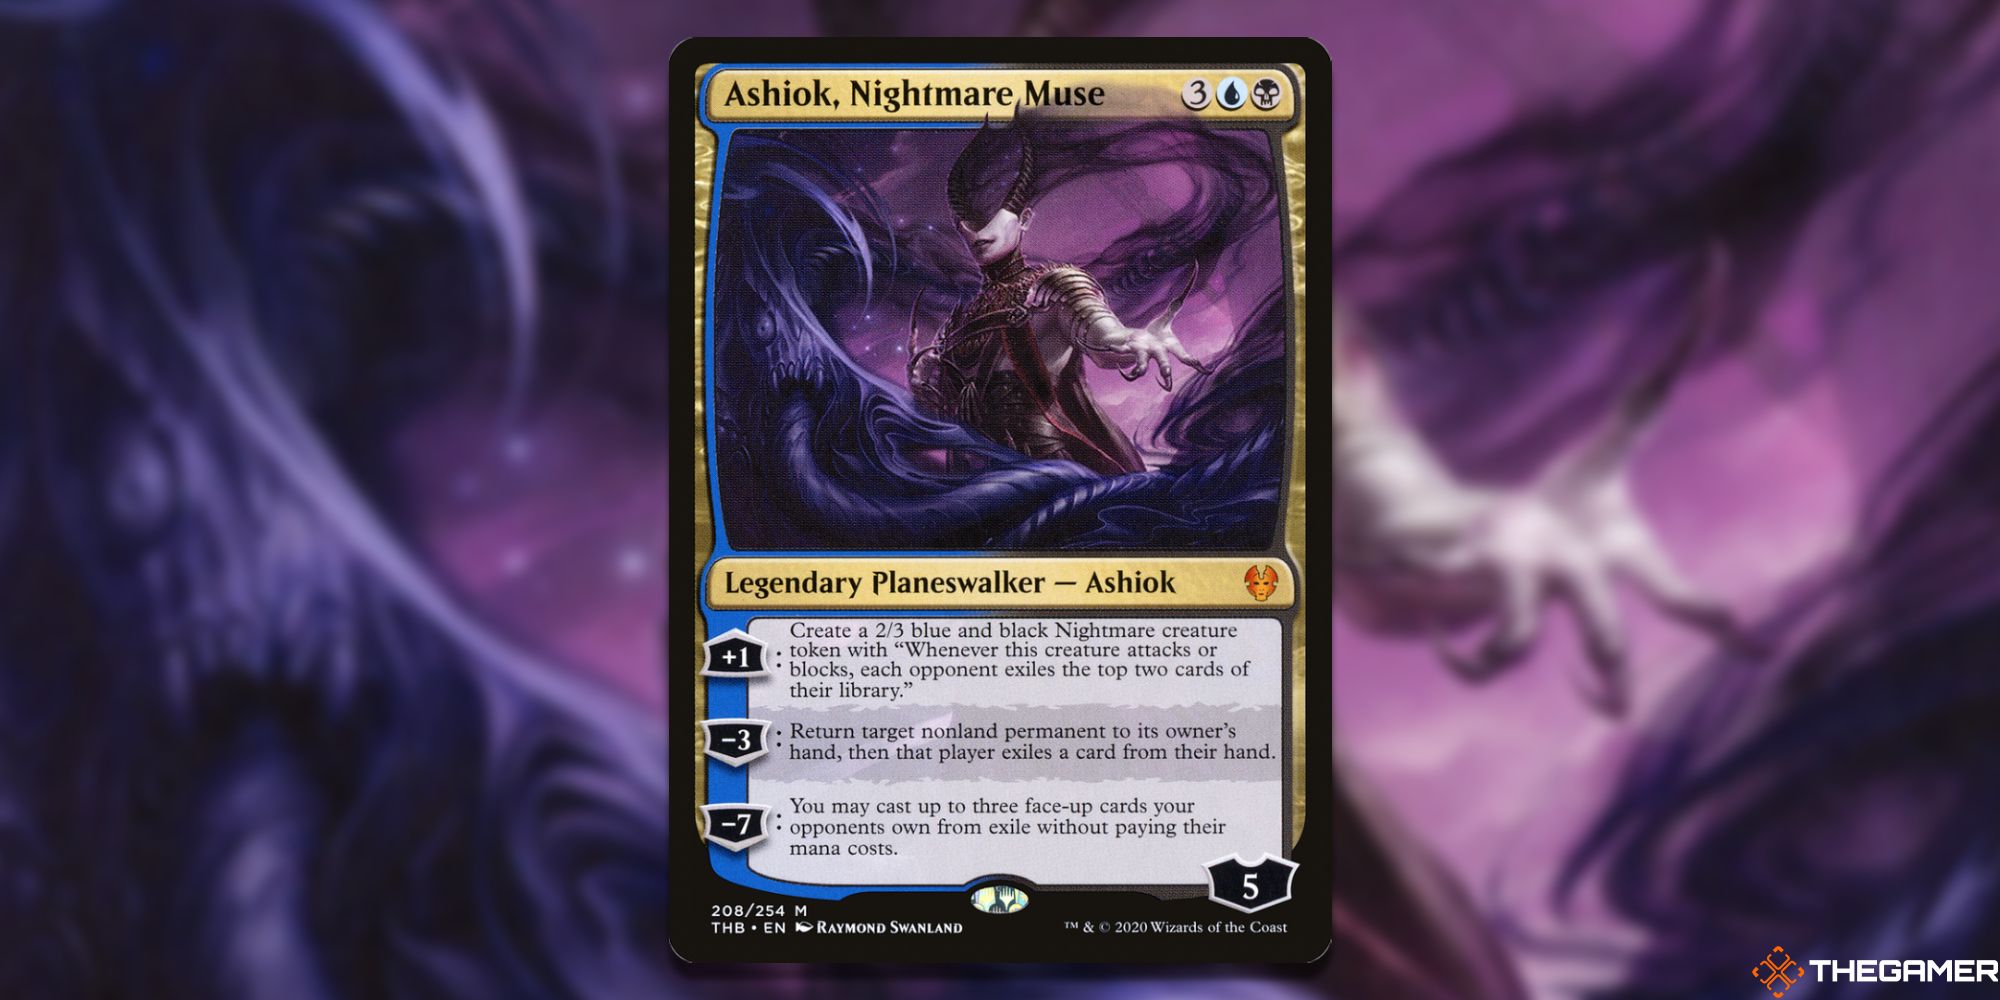 Image of the Ashiok Nightmare Muse card in Magic: The Gathering, with art by Raymond Swanland